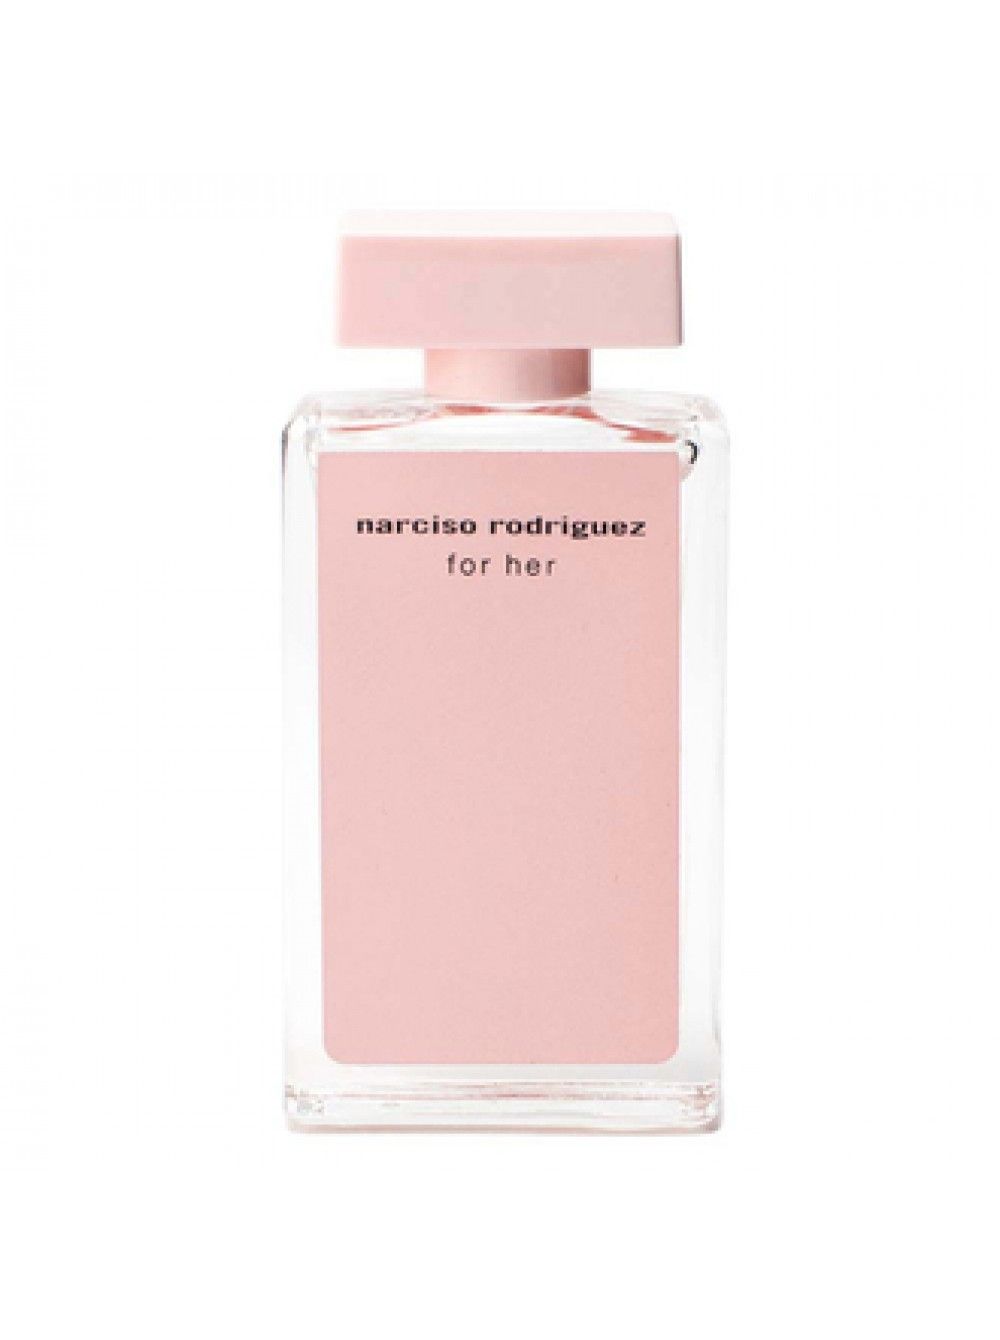 Narciso Rodriguez for her 100ml. Narciso Rodriguez for her EDP 7.5ml. Narciso Rodriguez for her Eau de Parfum. Narciso Rodriguez for her Eau de Parfum Narciso Rodriguez.